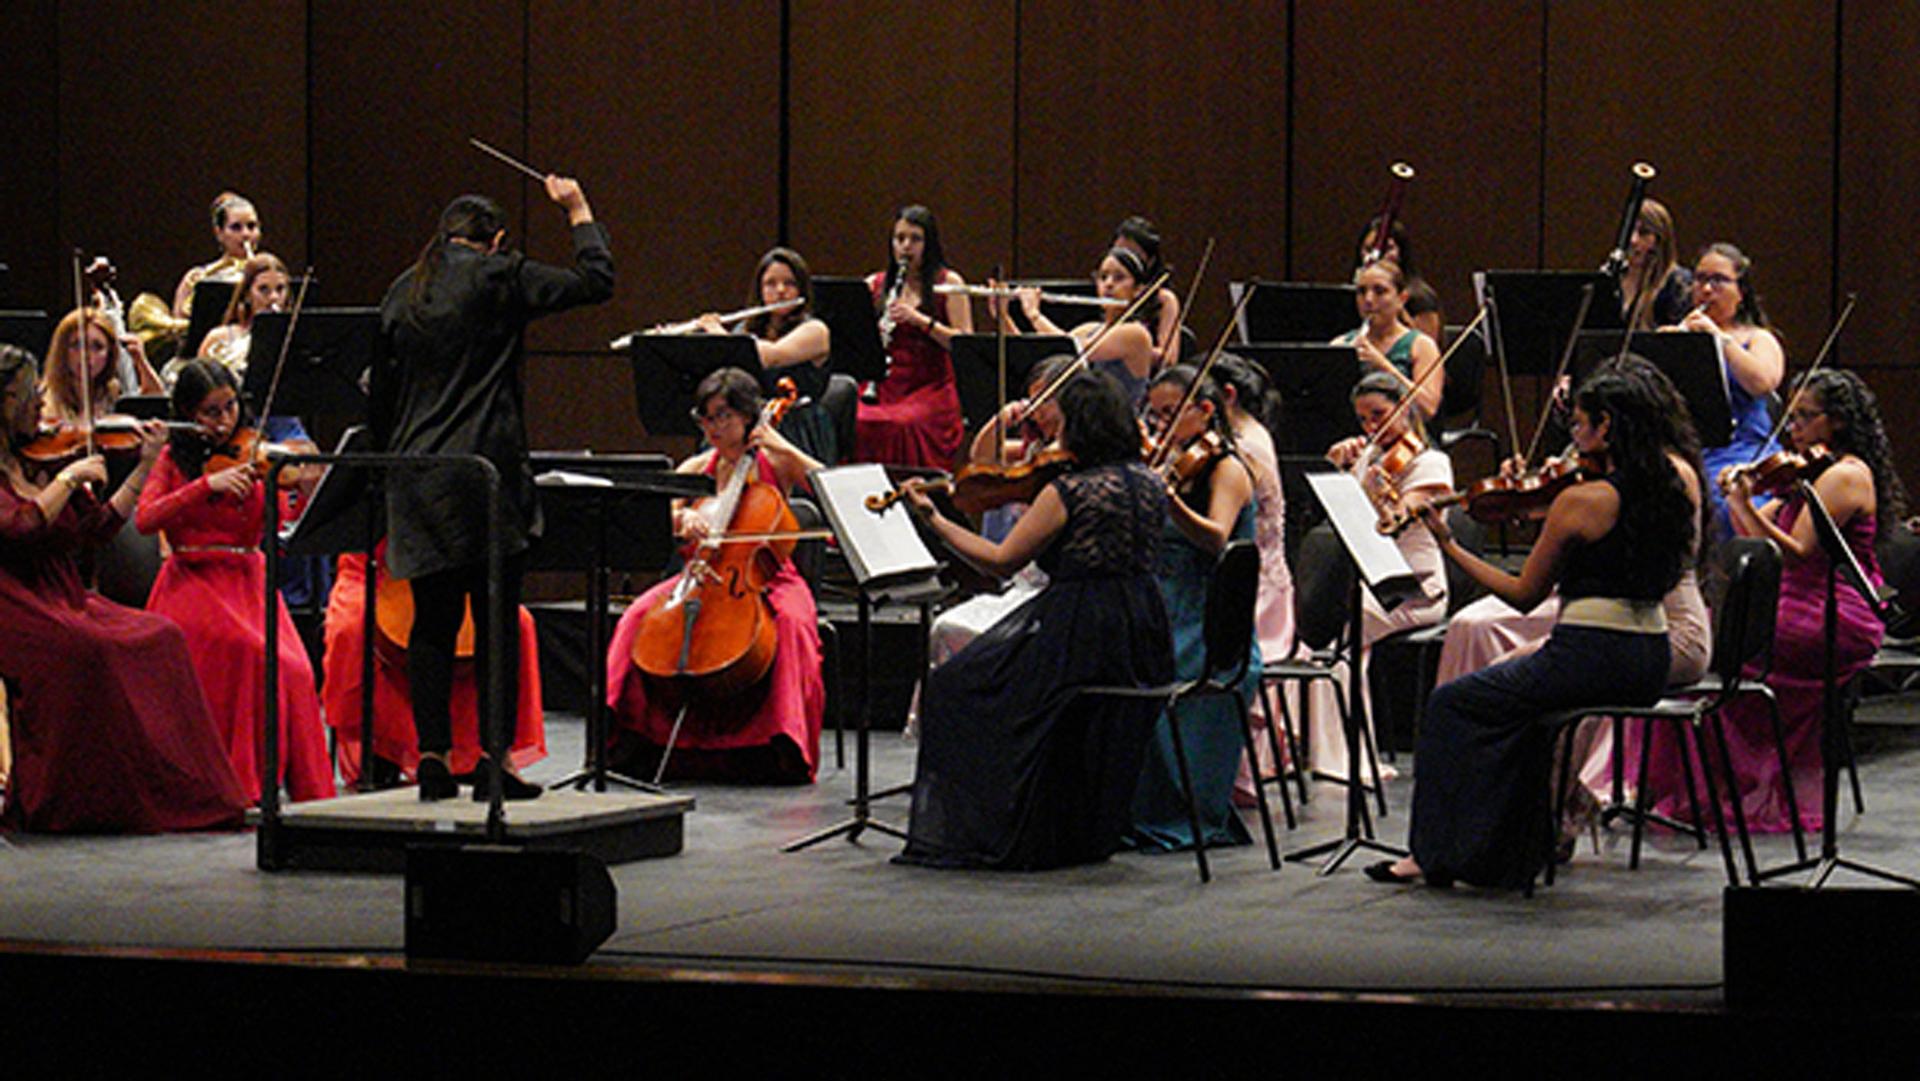 The Bogotá Philharmonic Women's Orchestra performs at the Jorge Eliecer Gaitan theater in Bogotá, Colombia.